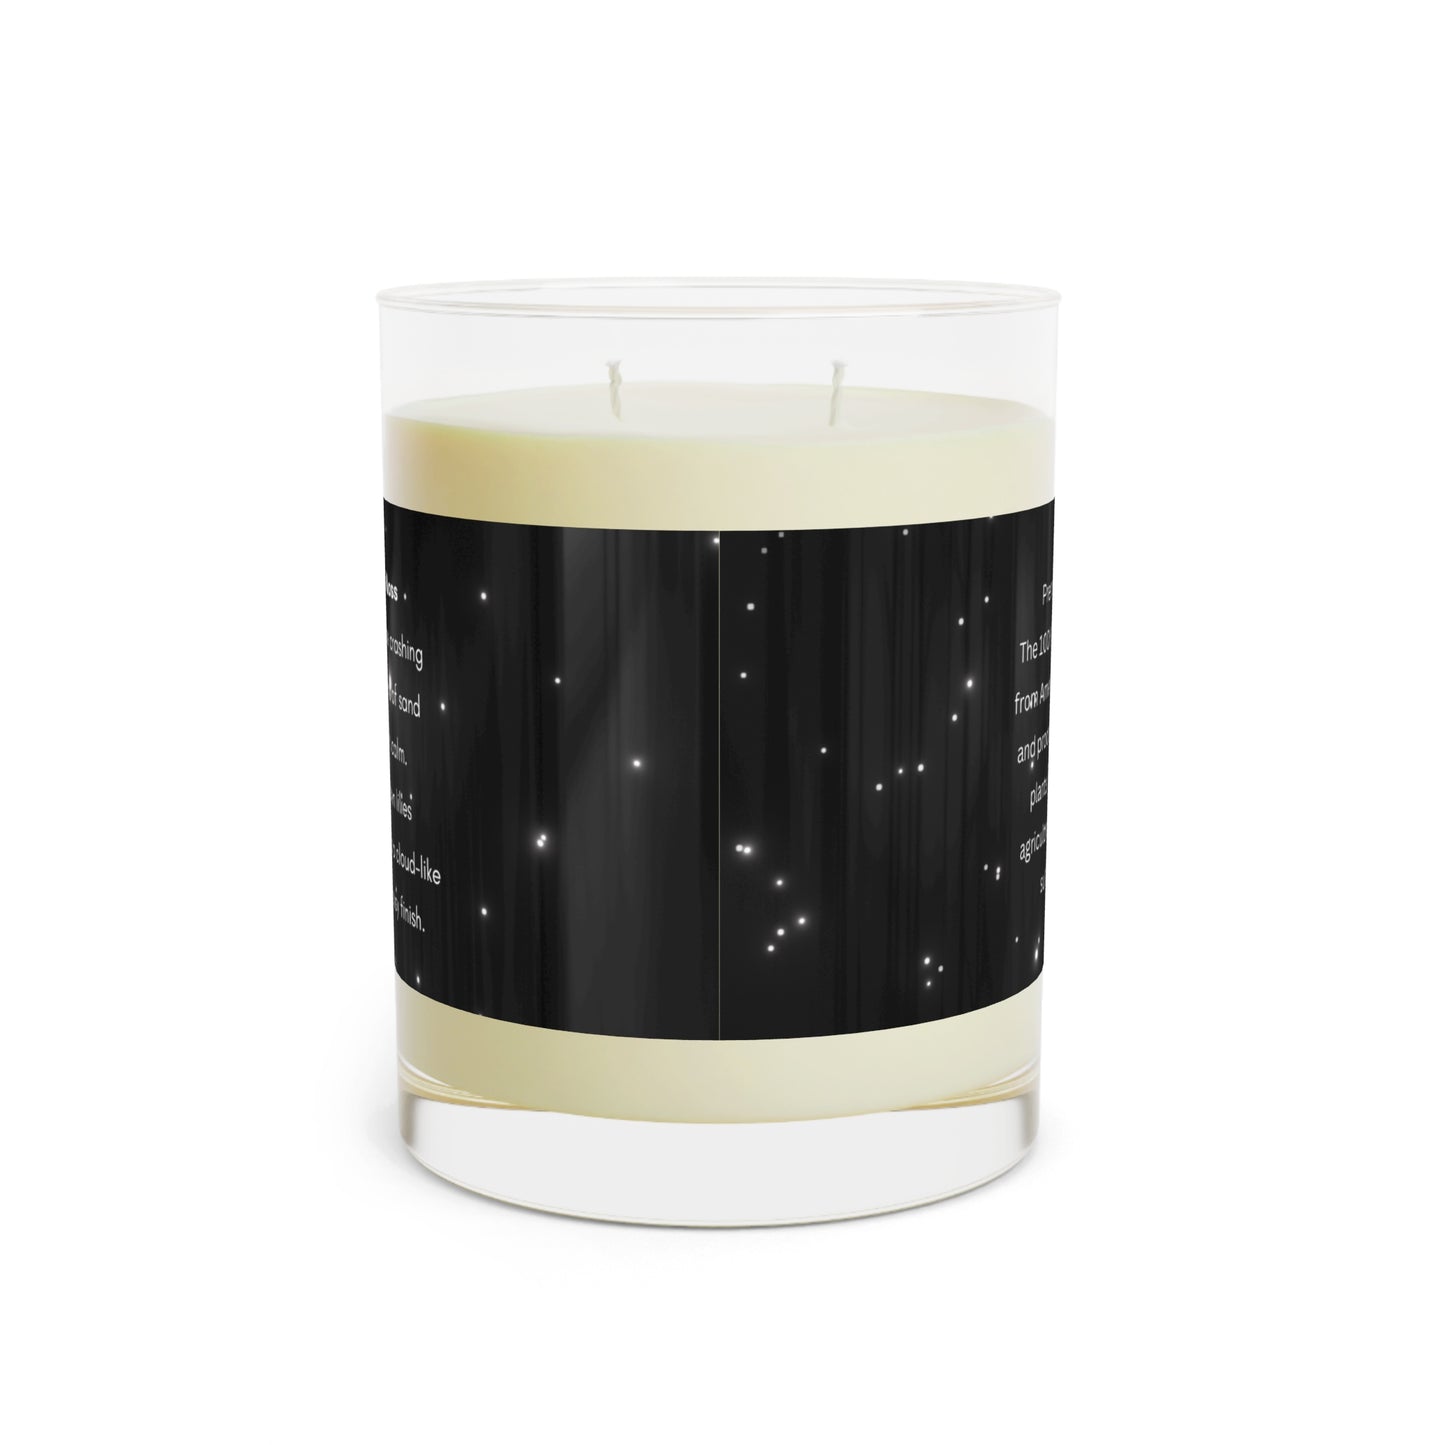 Aromatherapy | Tranquility | Scented Candle - Full Glass, 11oz